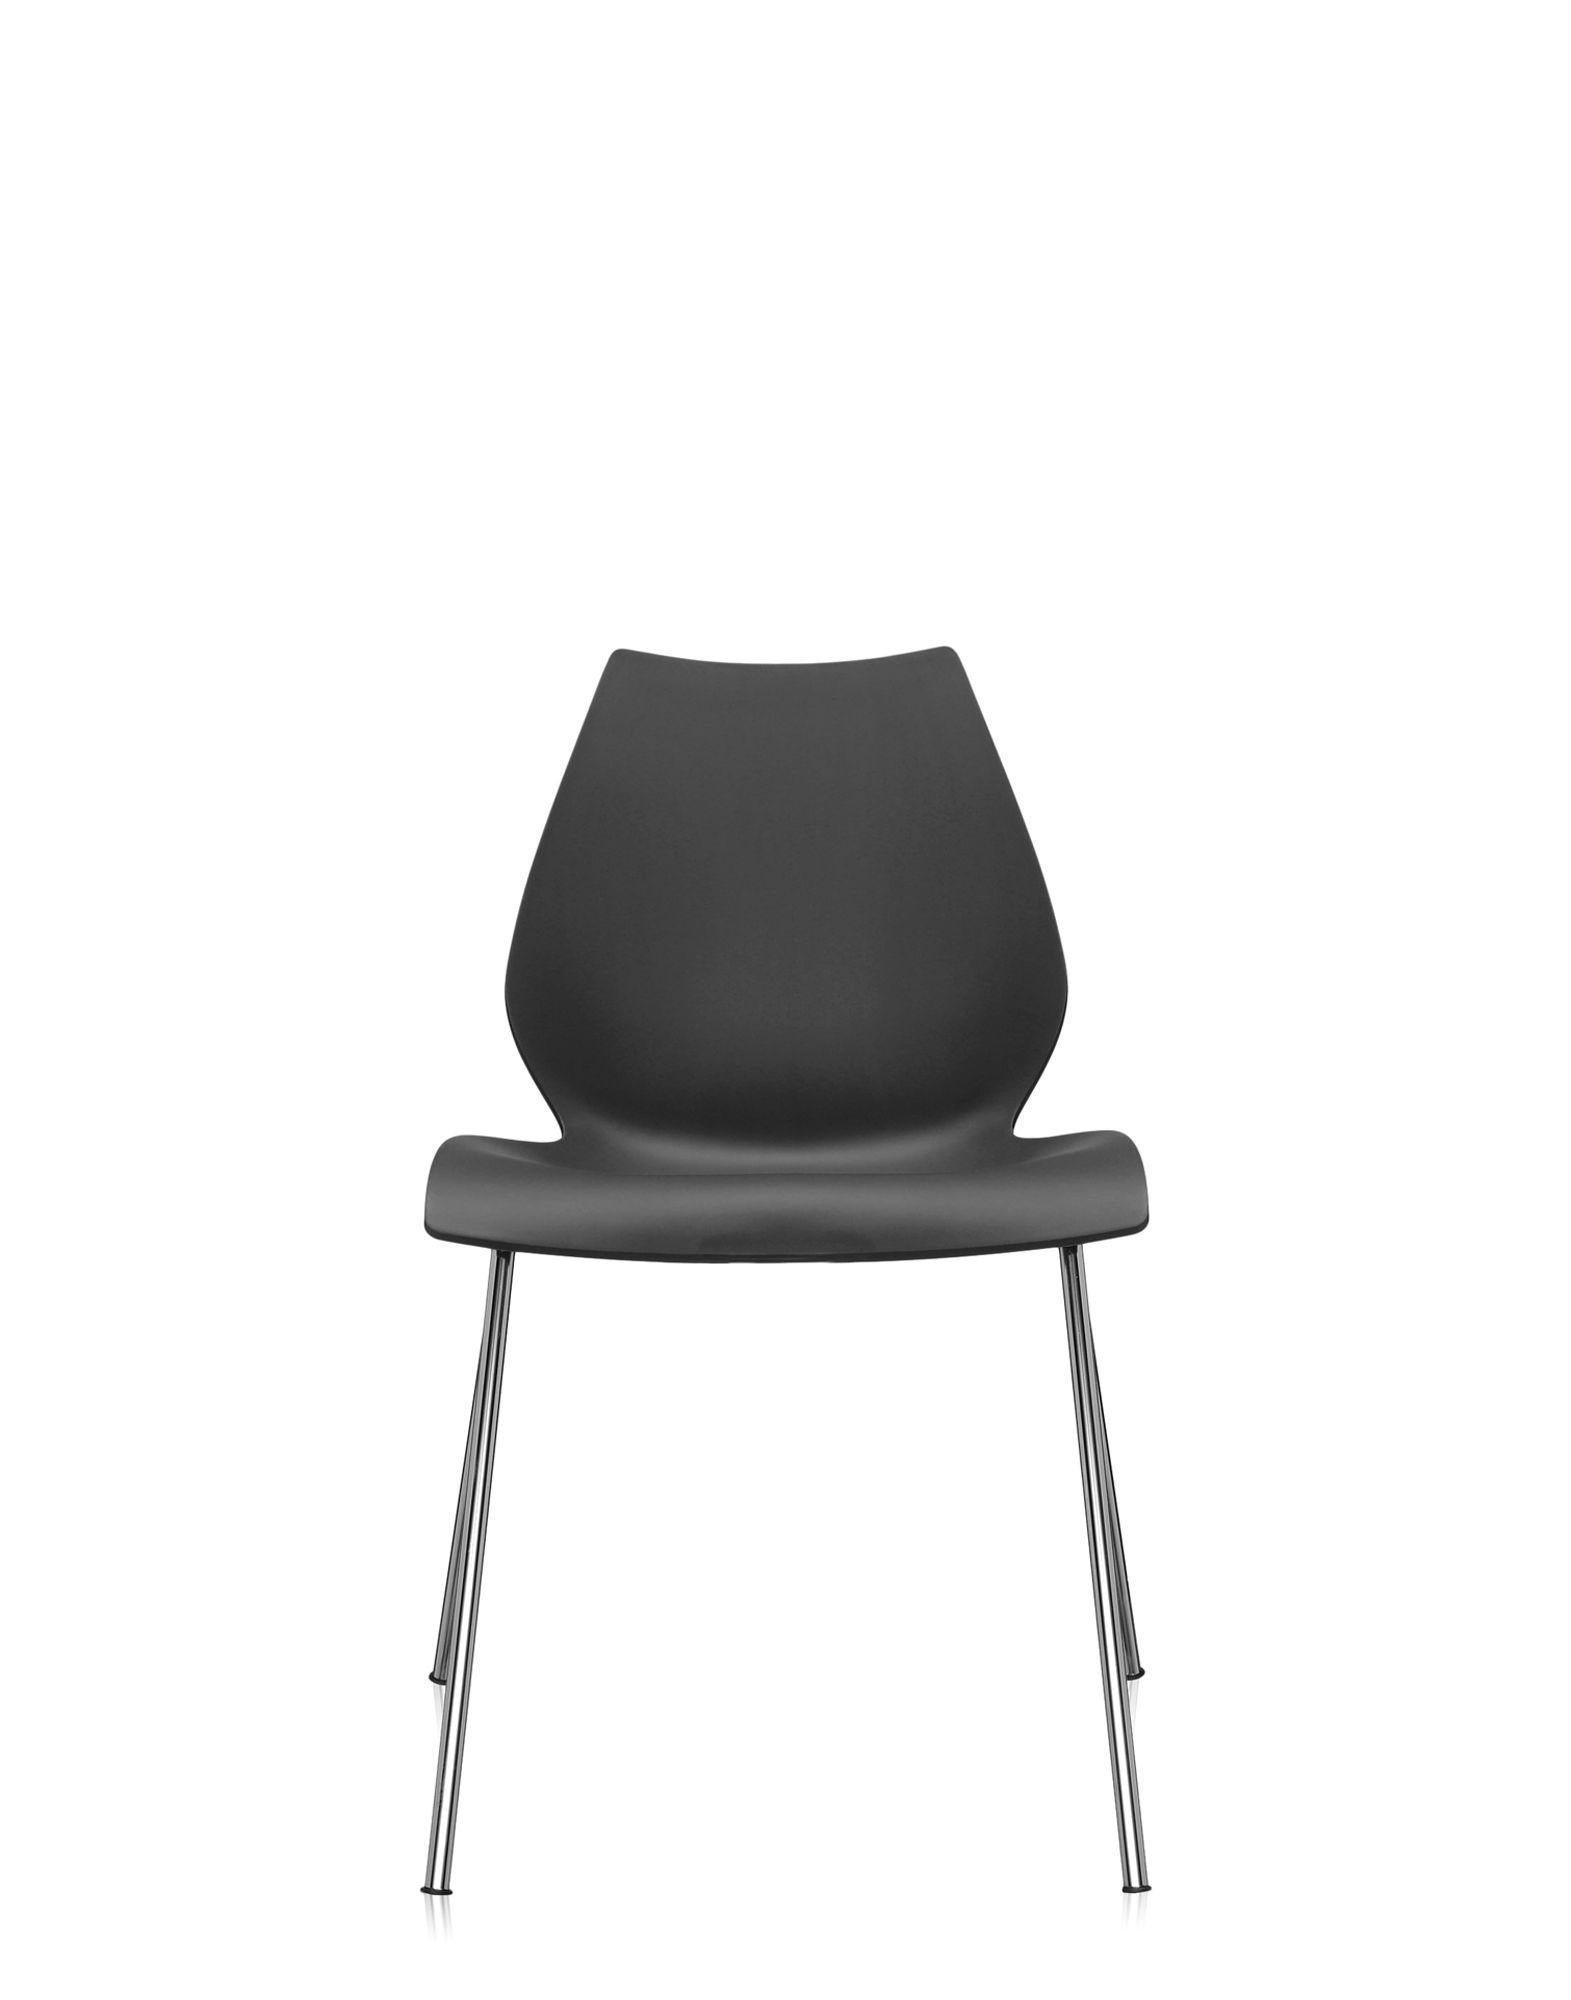 Italian Set of 2 Kartell Maui Armchair in Anthracite by Ludovica and Roberto Palomba